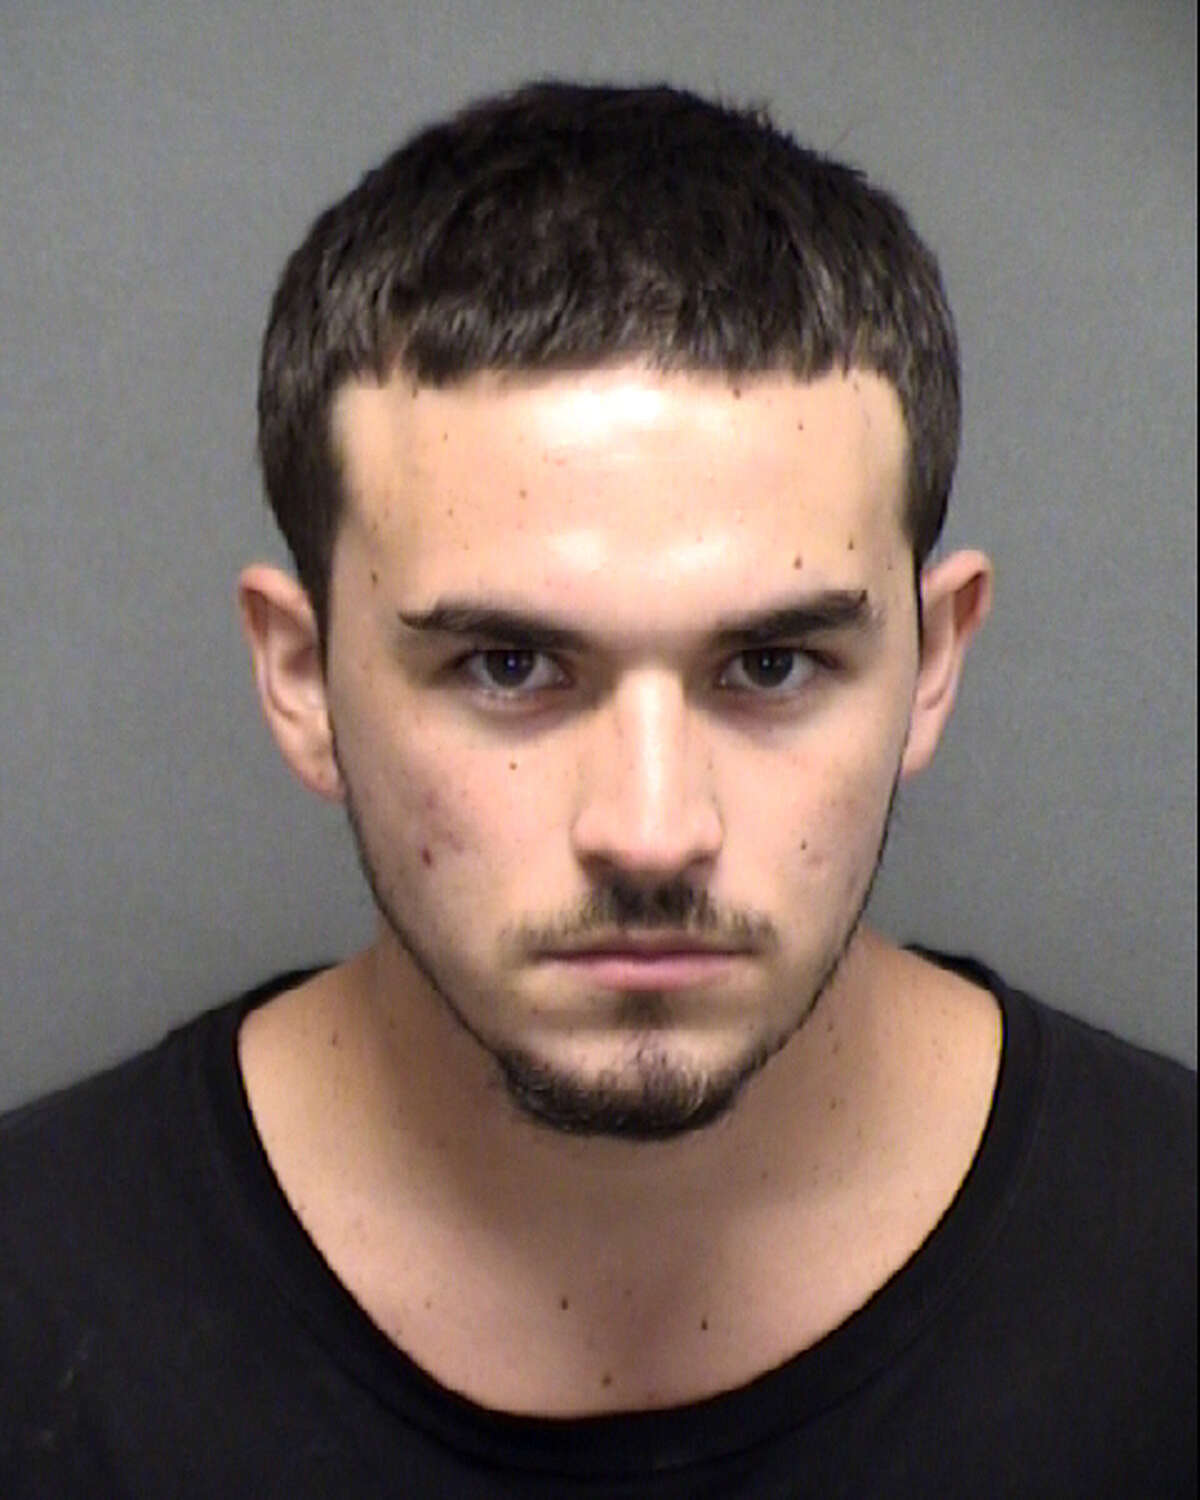 Wayne Waldrip III, 21, of San Antonio, was arrested for assault, resisting arrest and unlawful carry of a weapon.